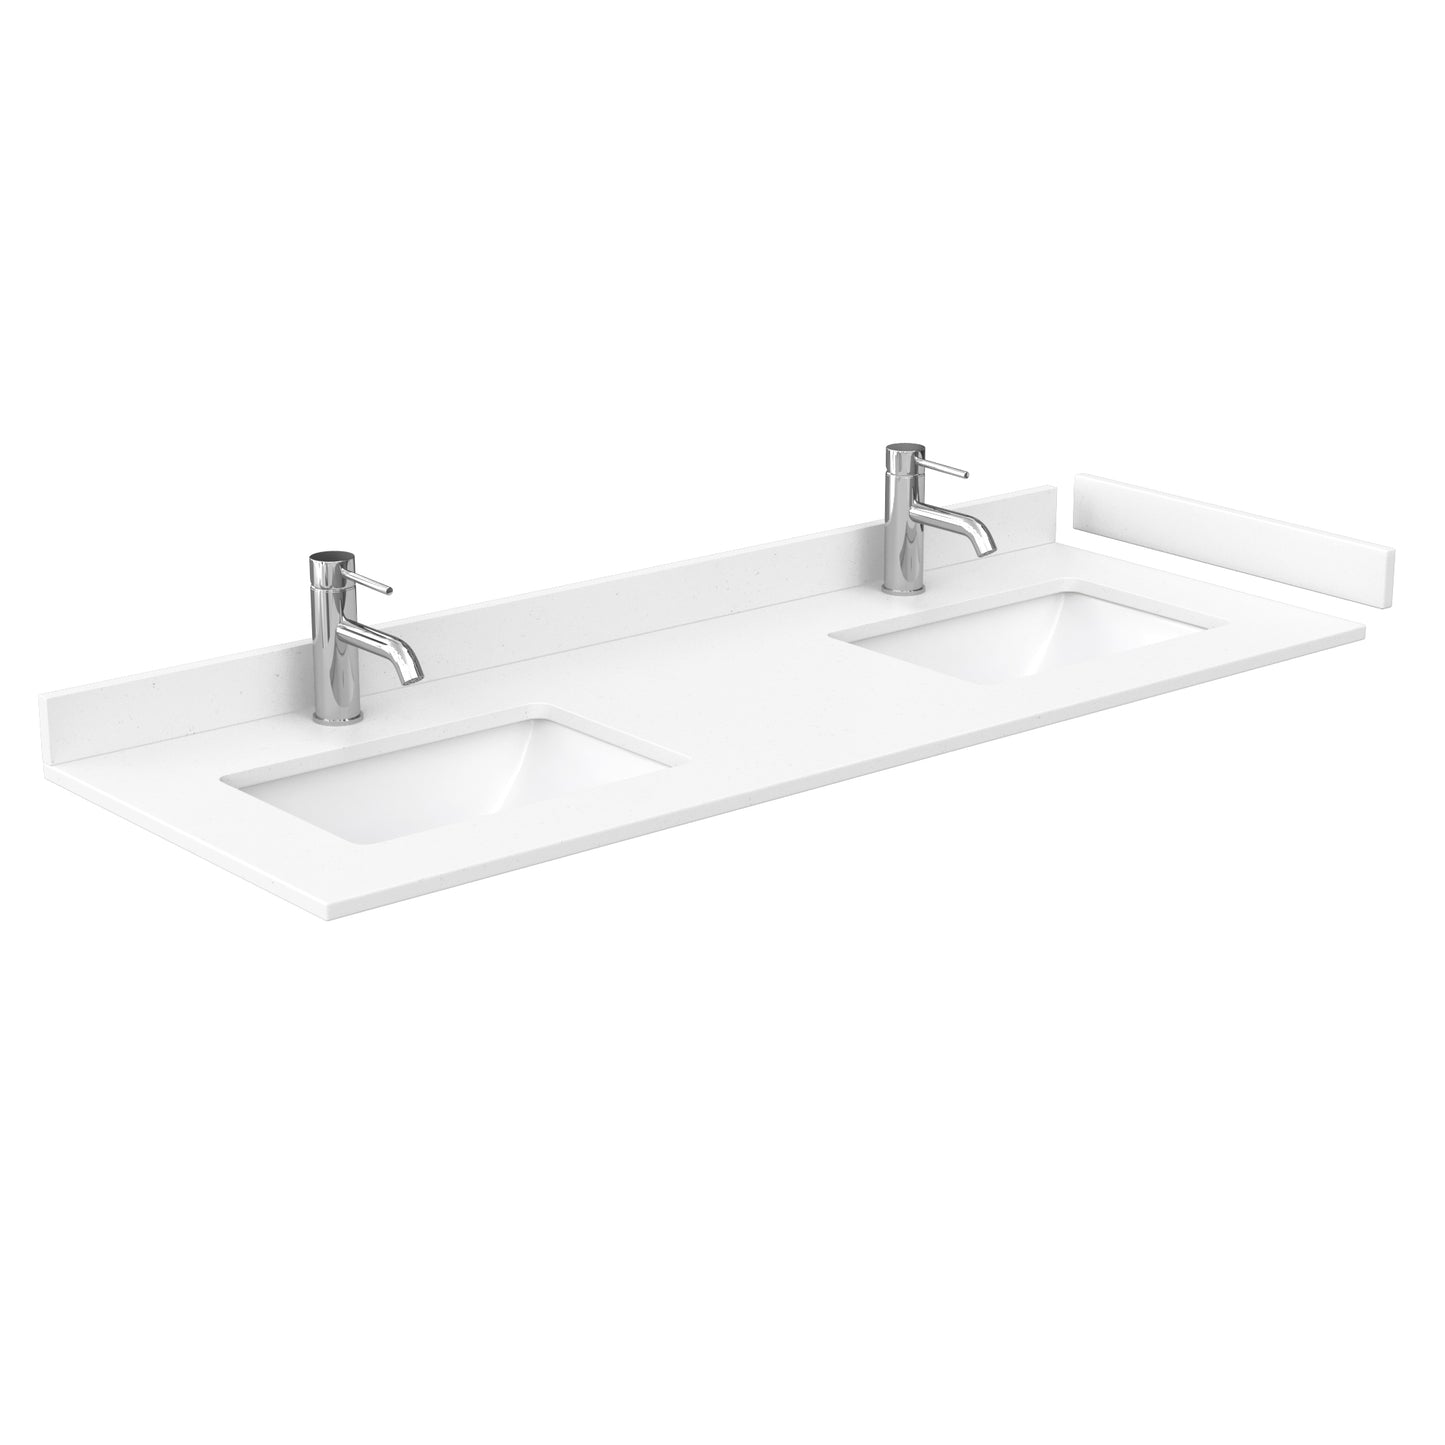 Wyndham Collection Daria 60 Inch Double Bathroom Vanity in White, White Cultured Marble Countertop, Undermount Square Sinks, Medicine Cabinets - Luxe Bathroom Vanities